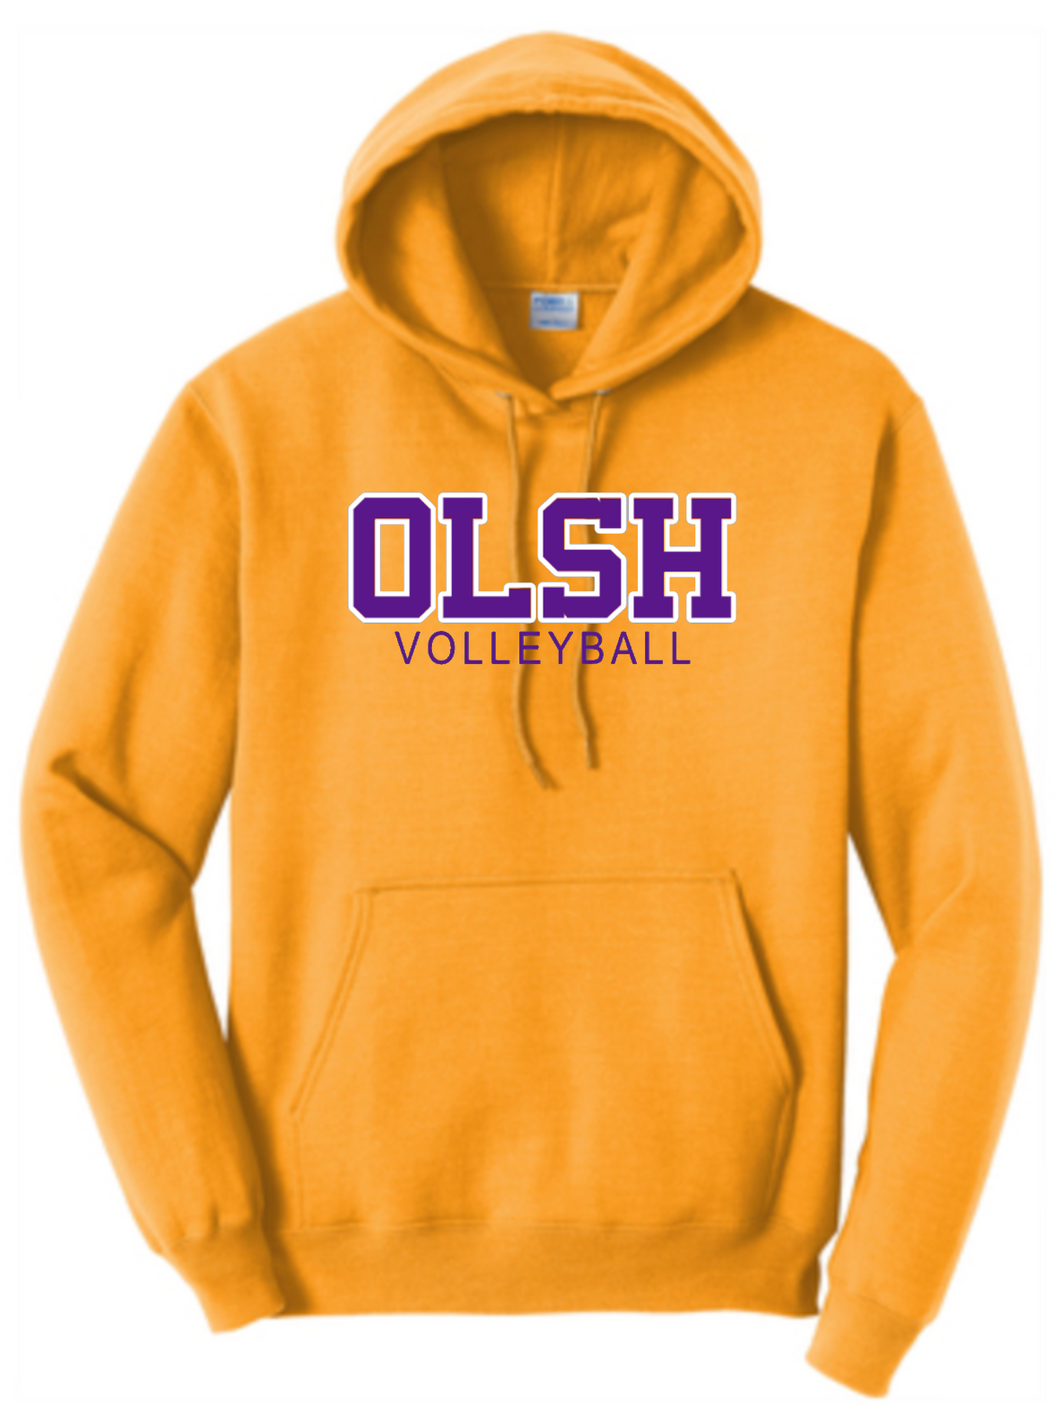 OLSH VOLLEYBALL YOUTH & ADULT YELLOW GOLD HOODED SWEATSHIRT